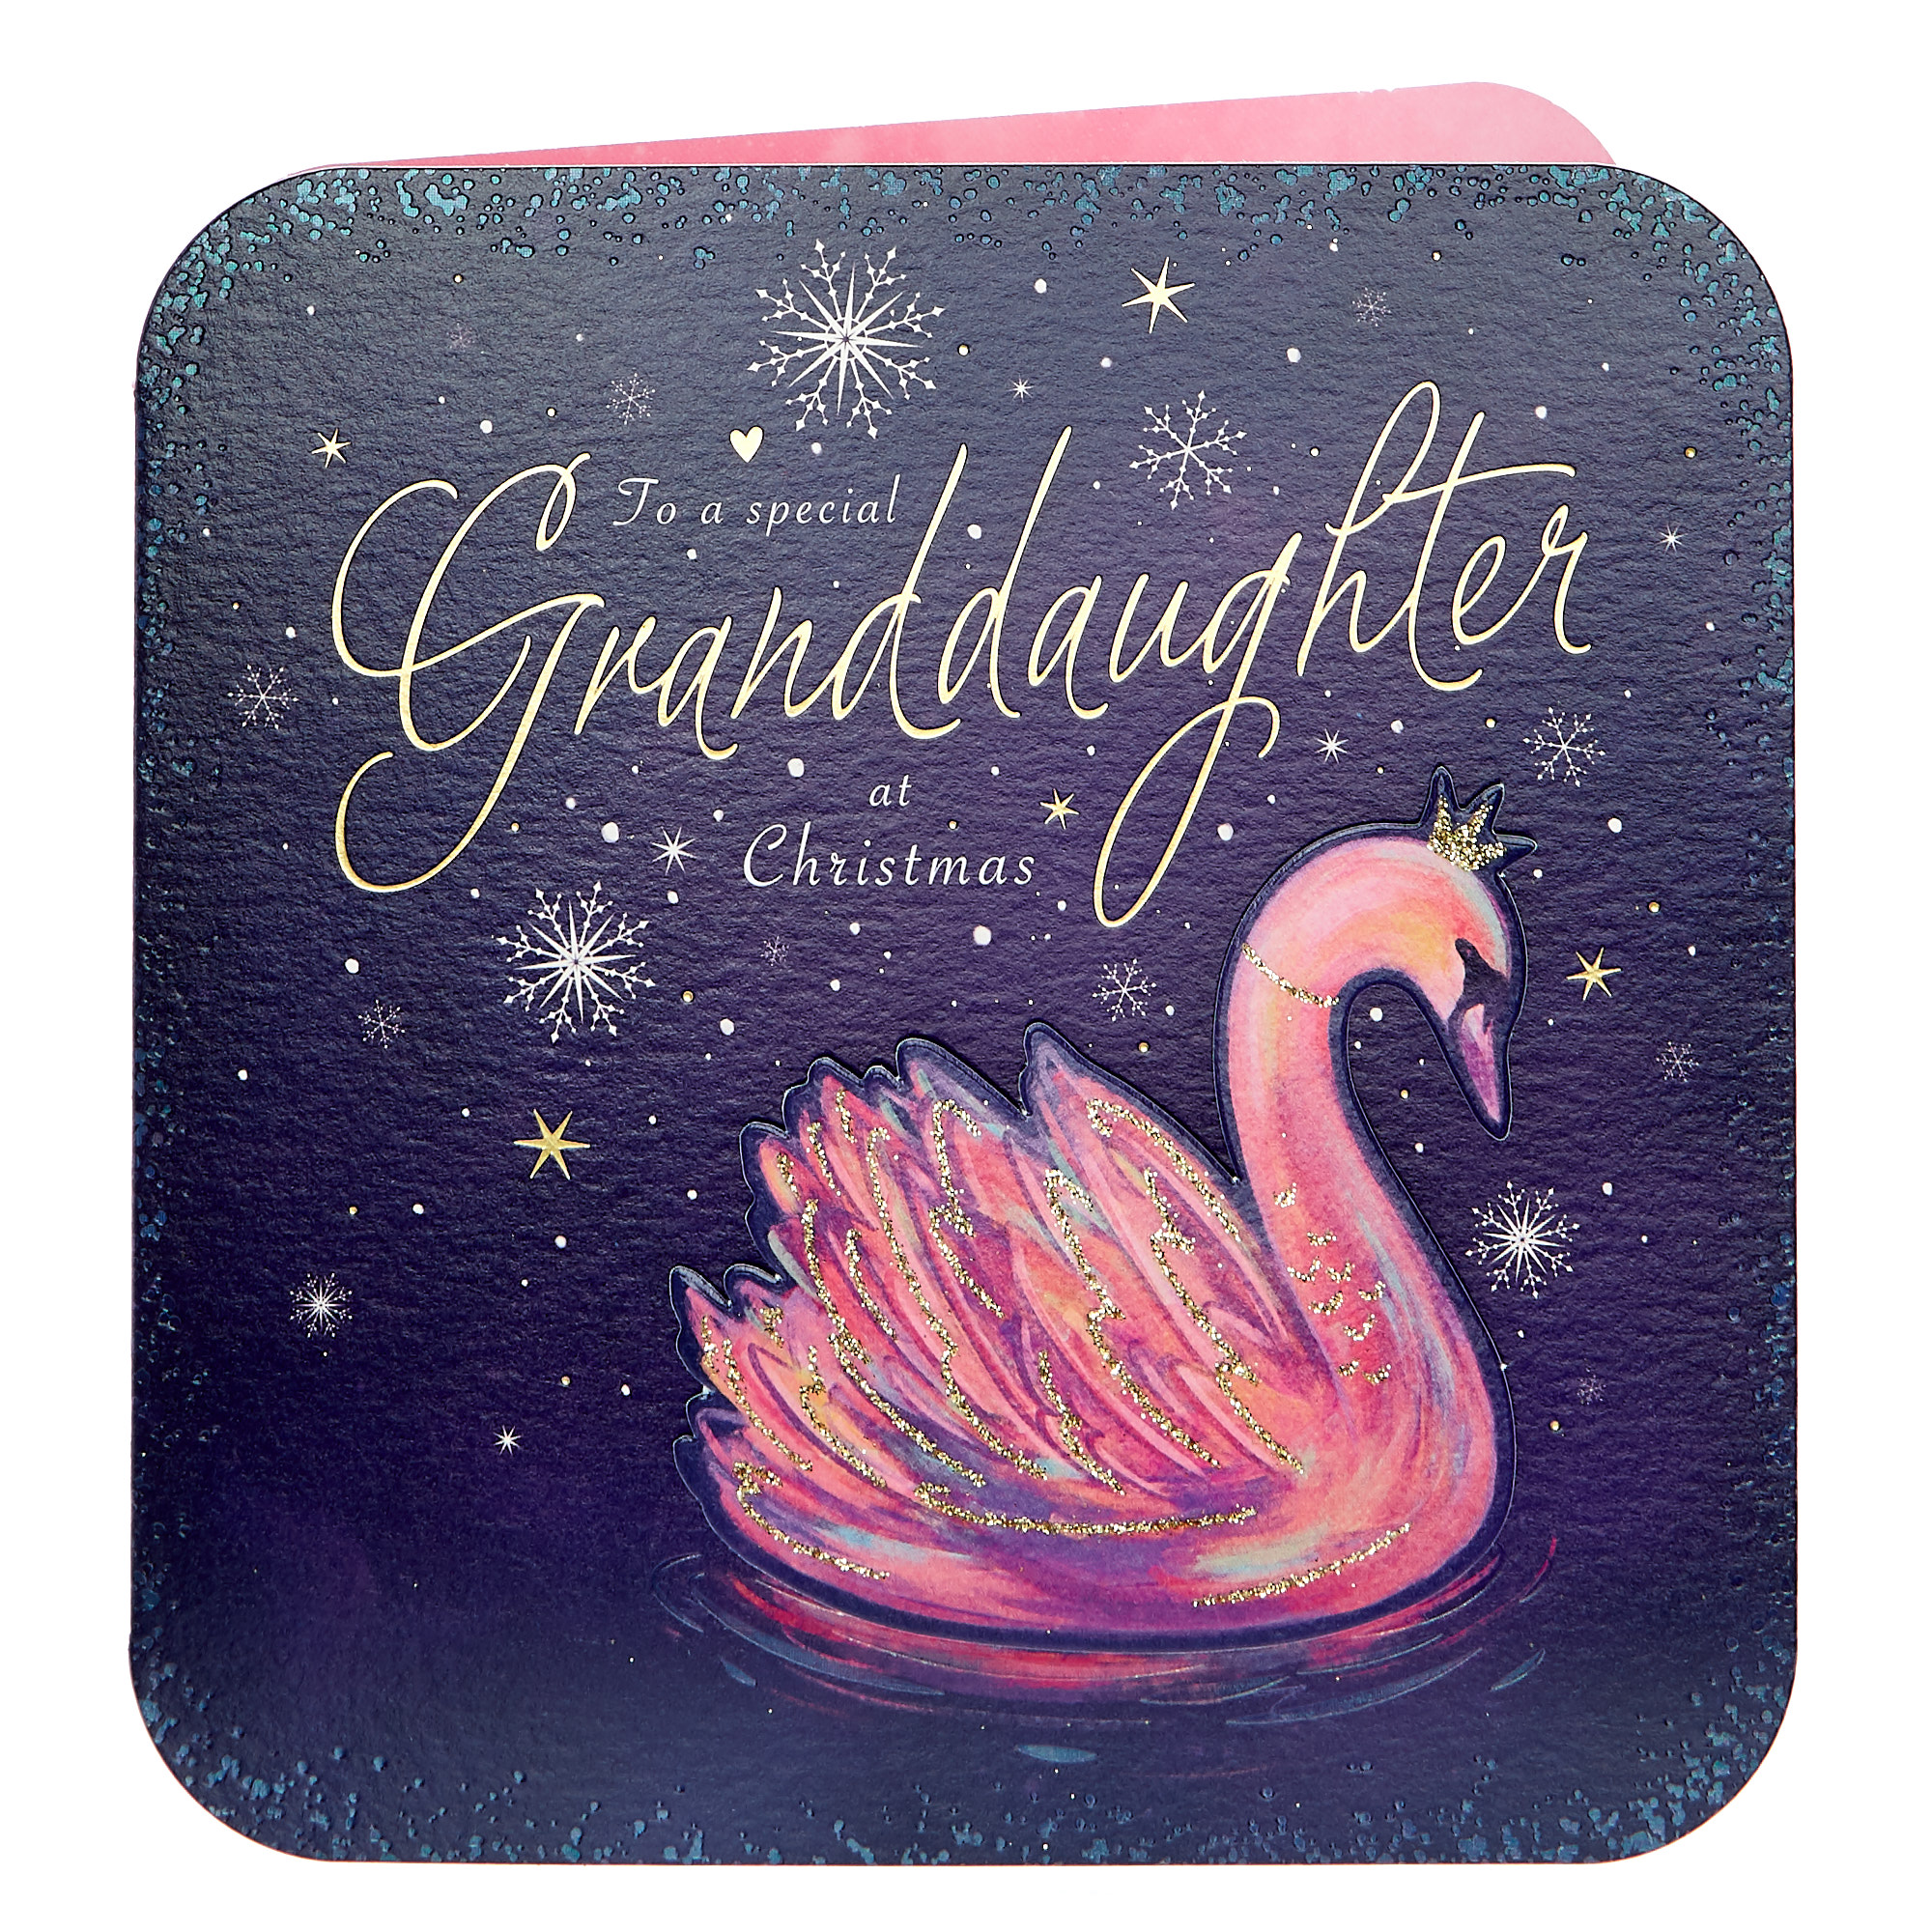 Boutique Collection Christmas Card - Granddaughter Swan